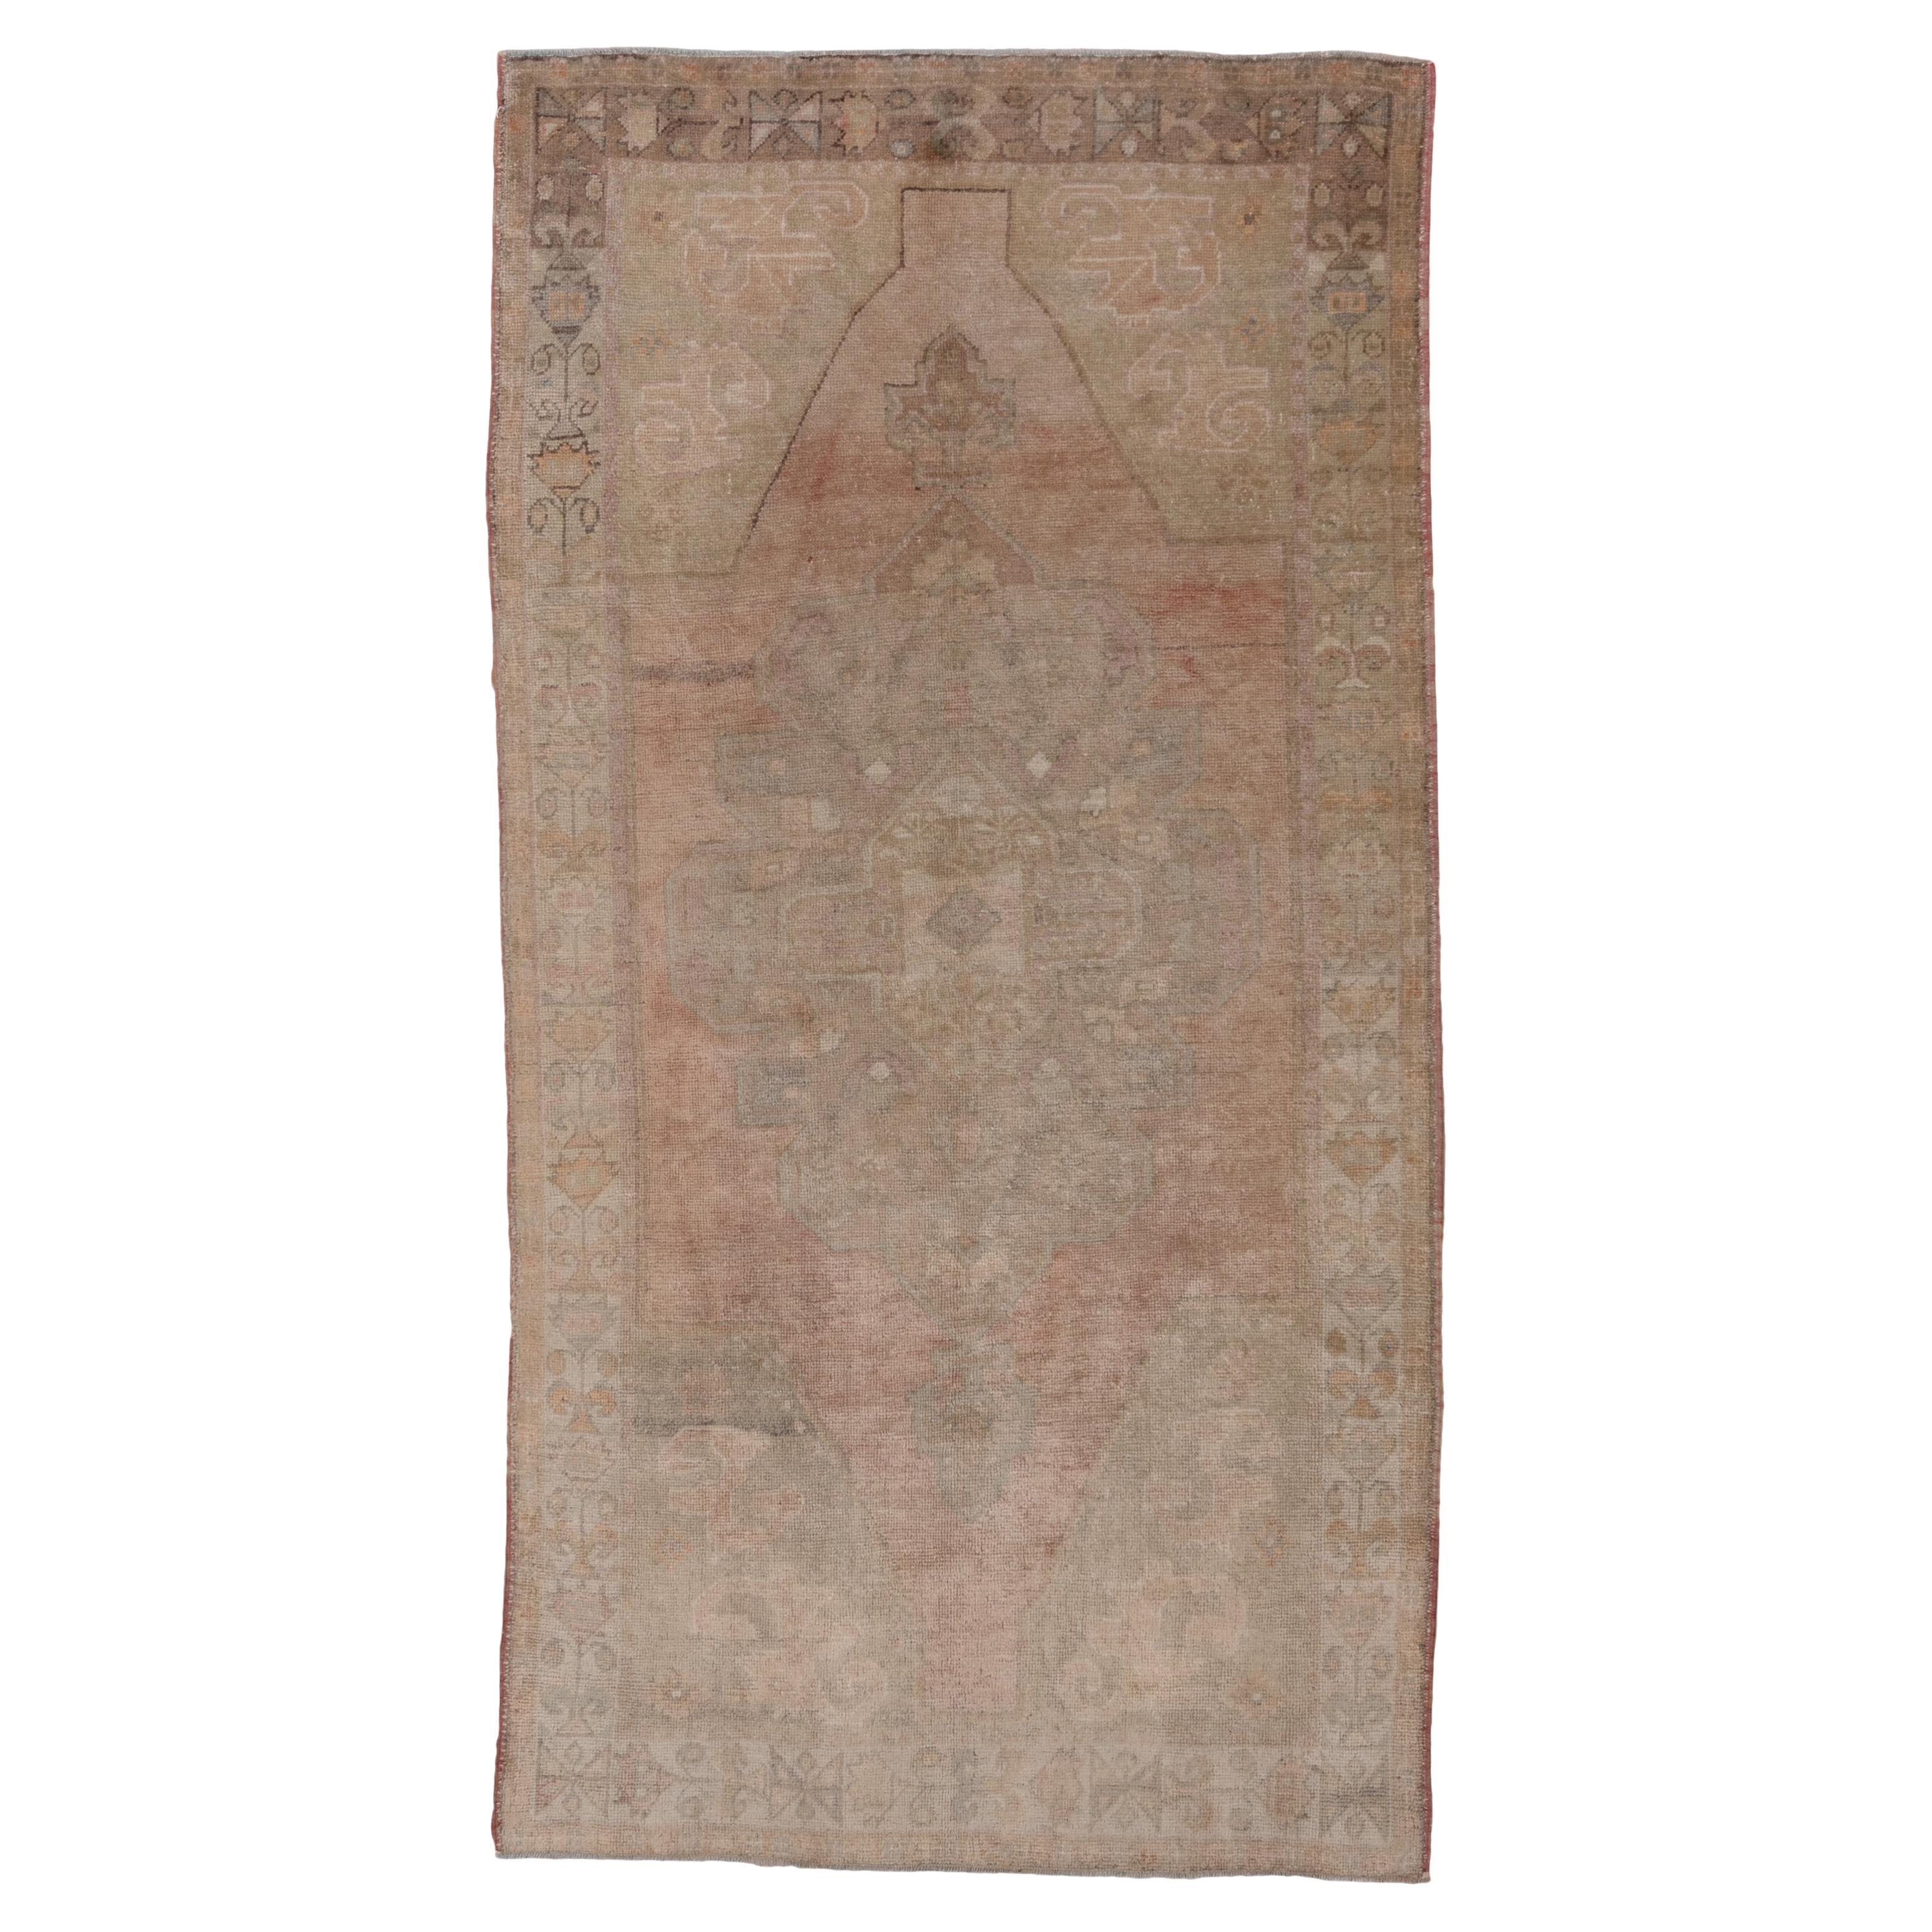 Oushak Rug, Muted Colors, Silky Pile